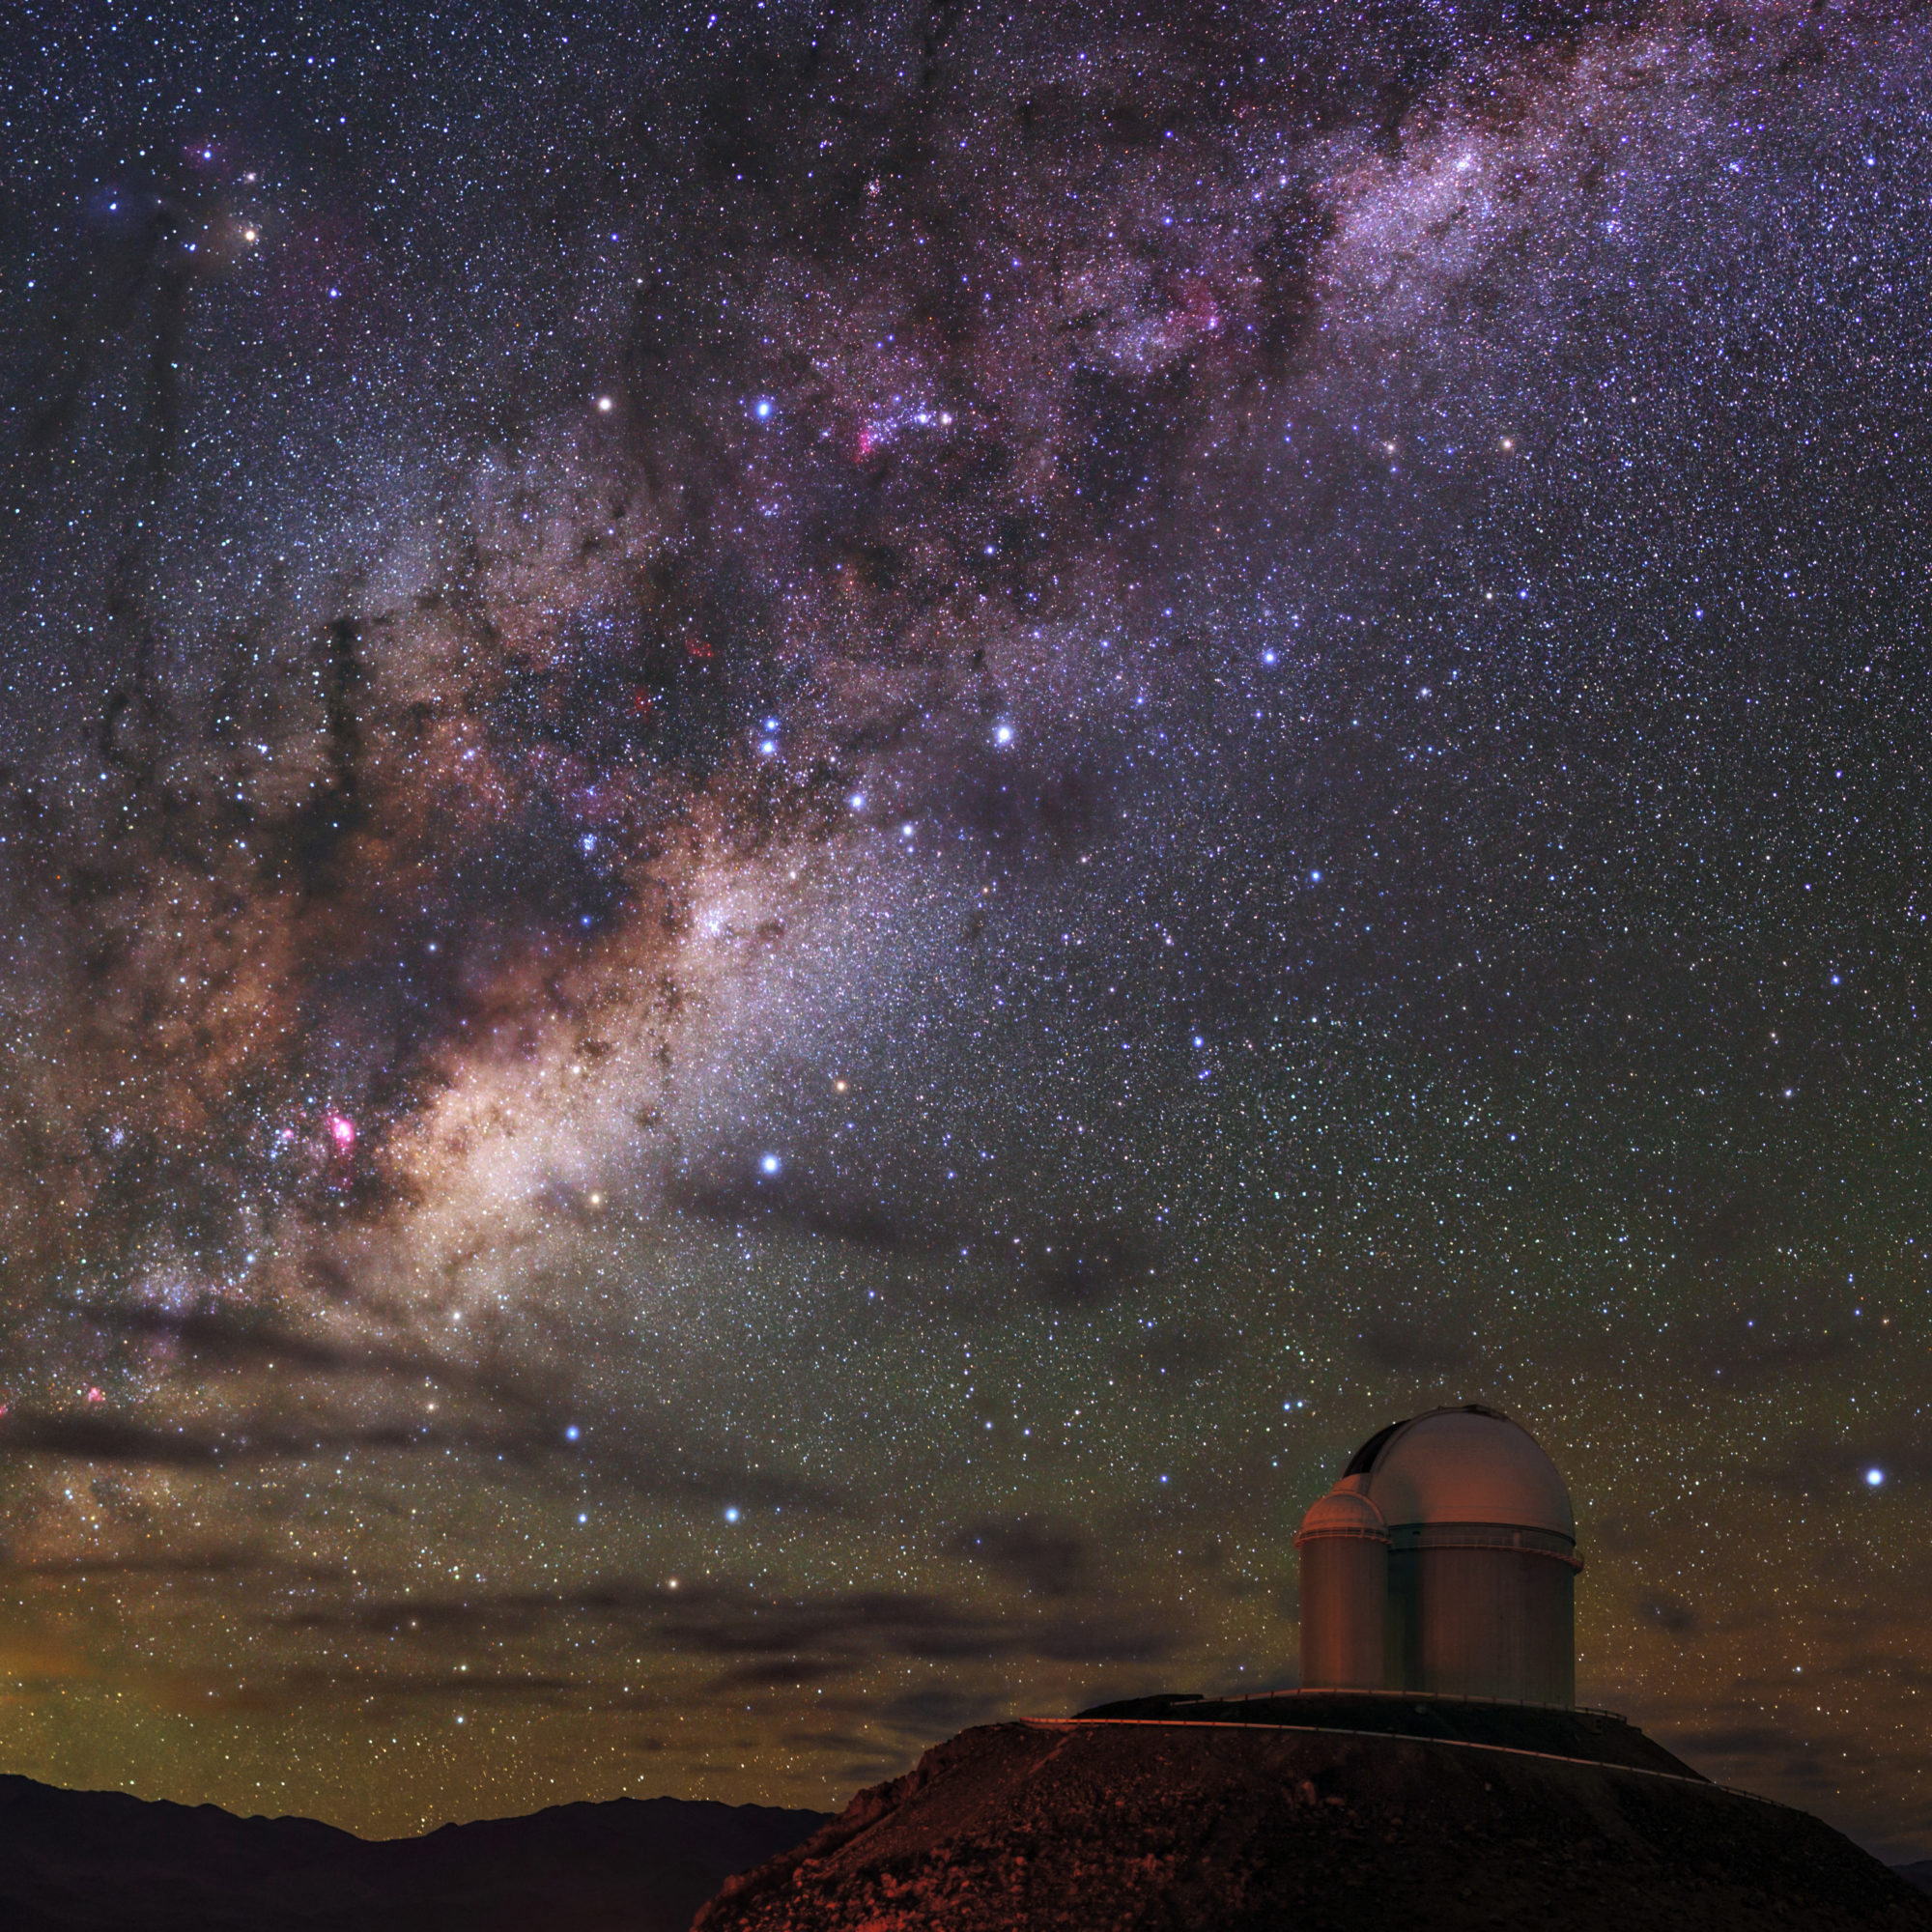 Our magnificent Milky Way galaxy is radiant over La Silla Observatory. The ESO 3.6-metre telescope is shown to the right, now home to the world's foremost extrasolar planet hunter: High Accuracy Radial velocity Planet Searcher (HARPS), a spectrograph with unrivalled precision.